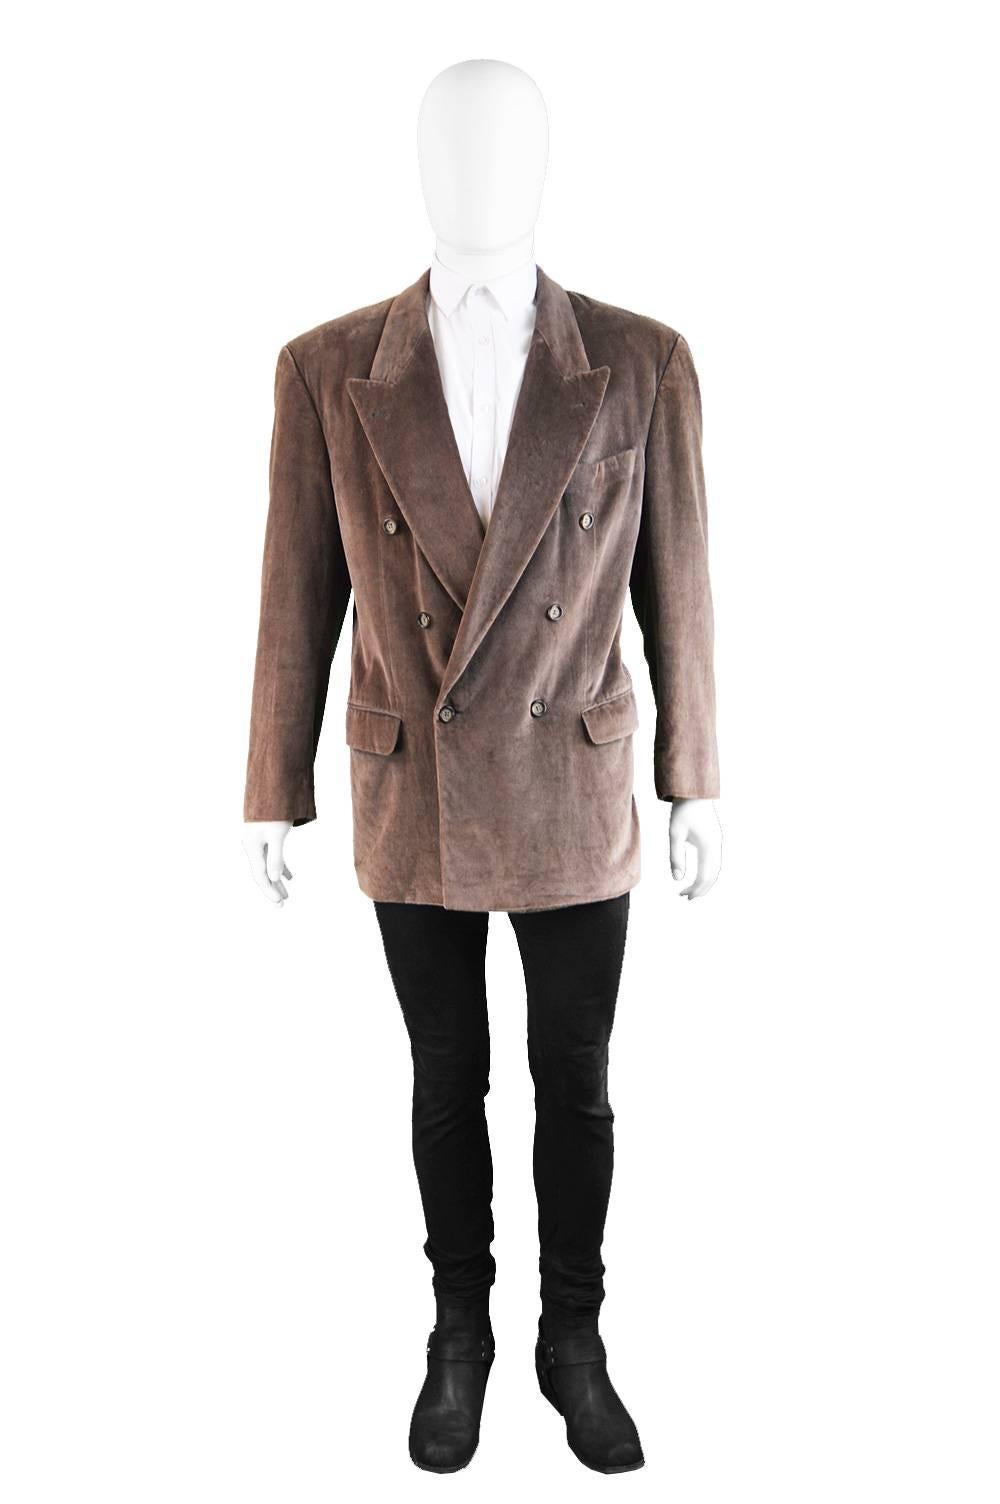 A stylish vintage mens velvet blazer from the 1980s by luxury German designer label, Hugo Boss for high end menswear store Mientus. In a brown cotton velvet with peaked lapels and double breasted buttons this jacket is perfect for evening or day